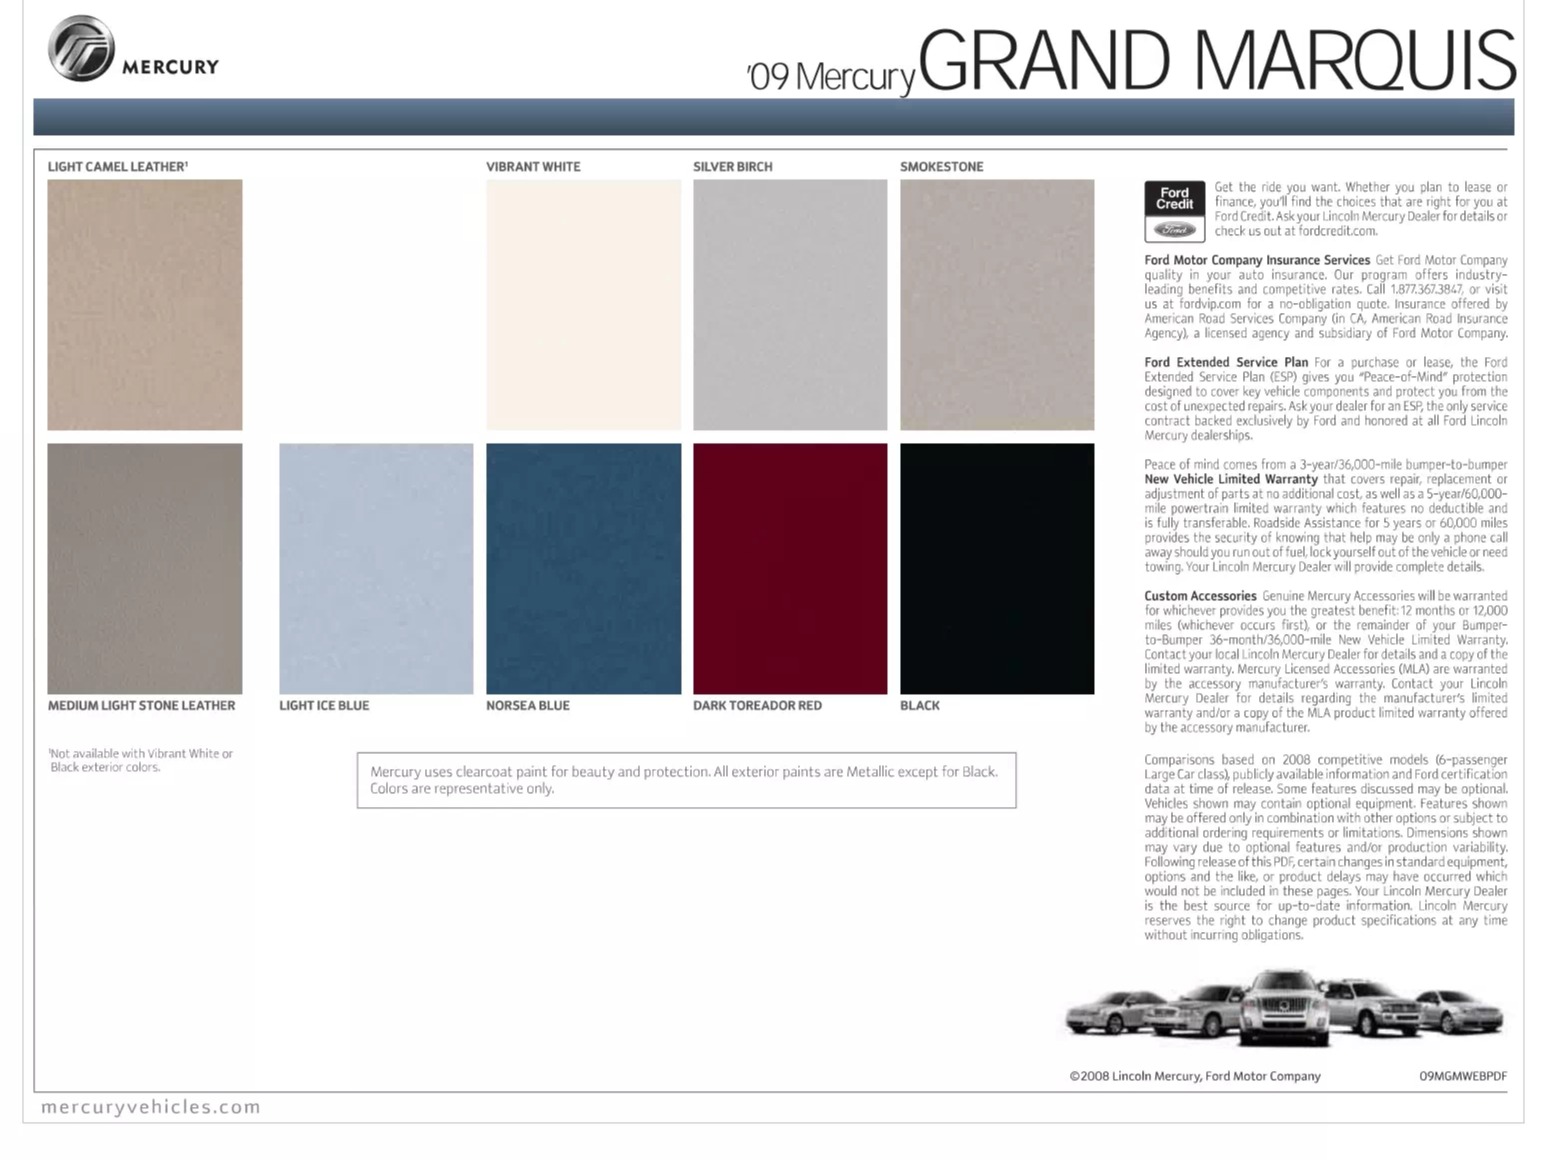 exterior color swatches showing what options were used on the 2009 Mercury Grand Marquis Vehicles